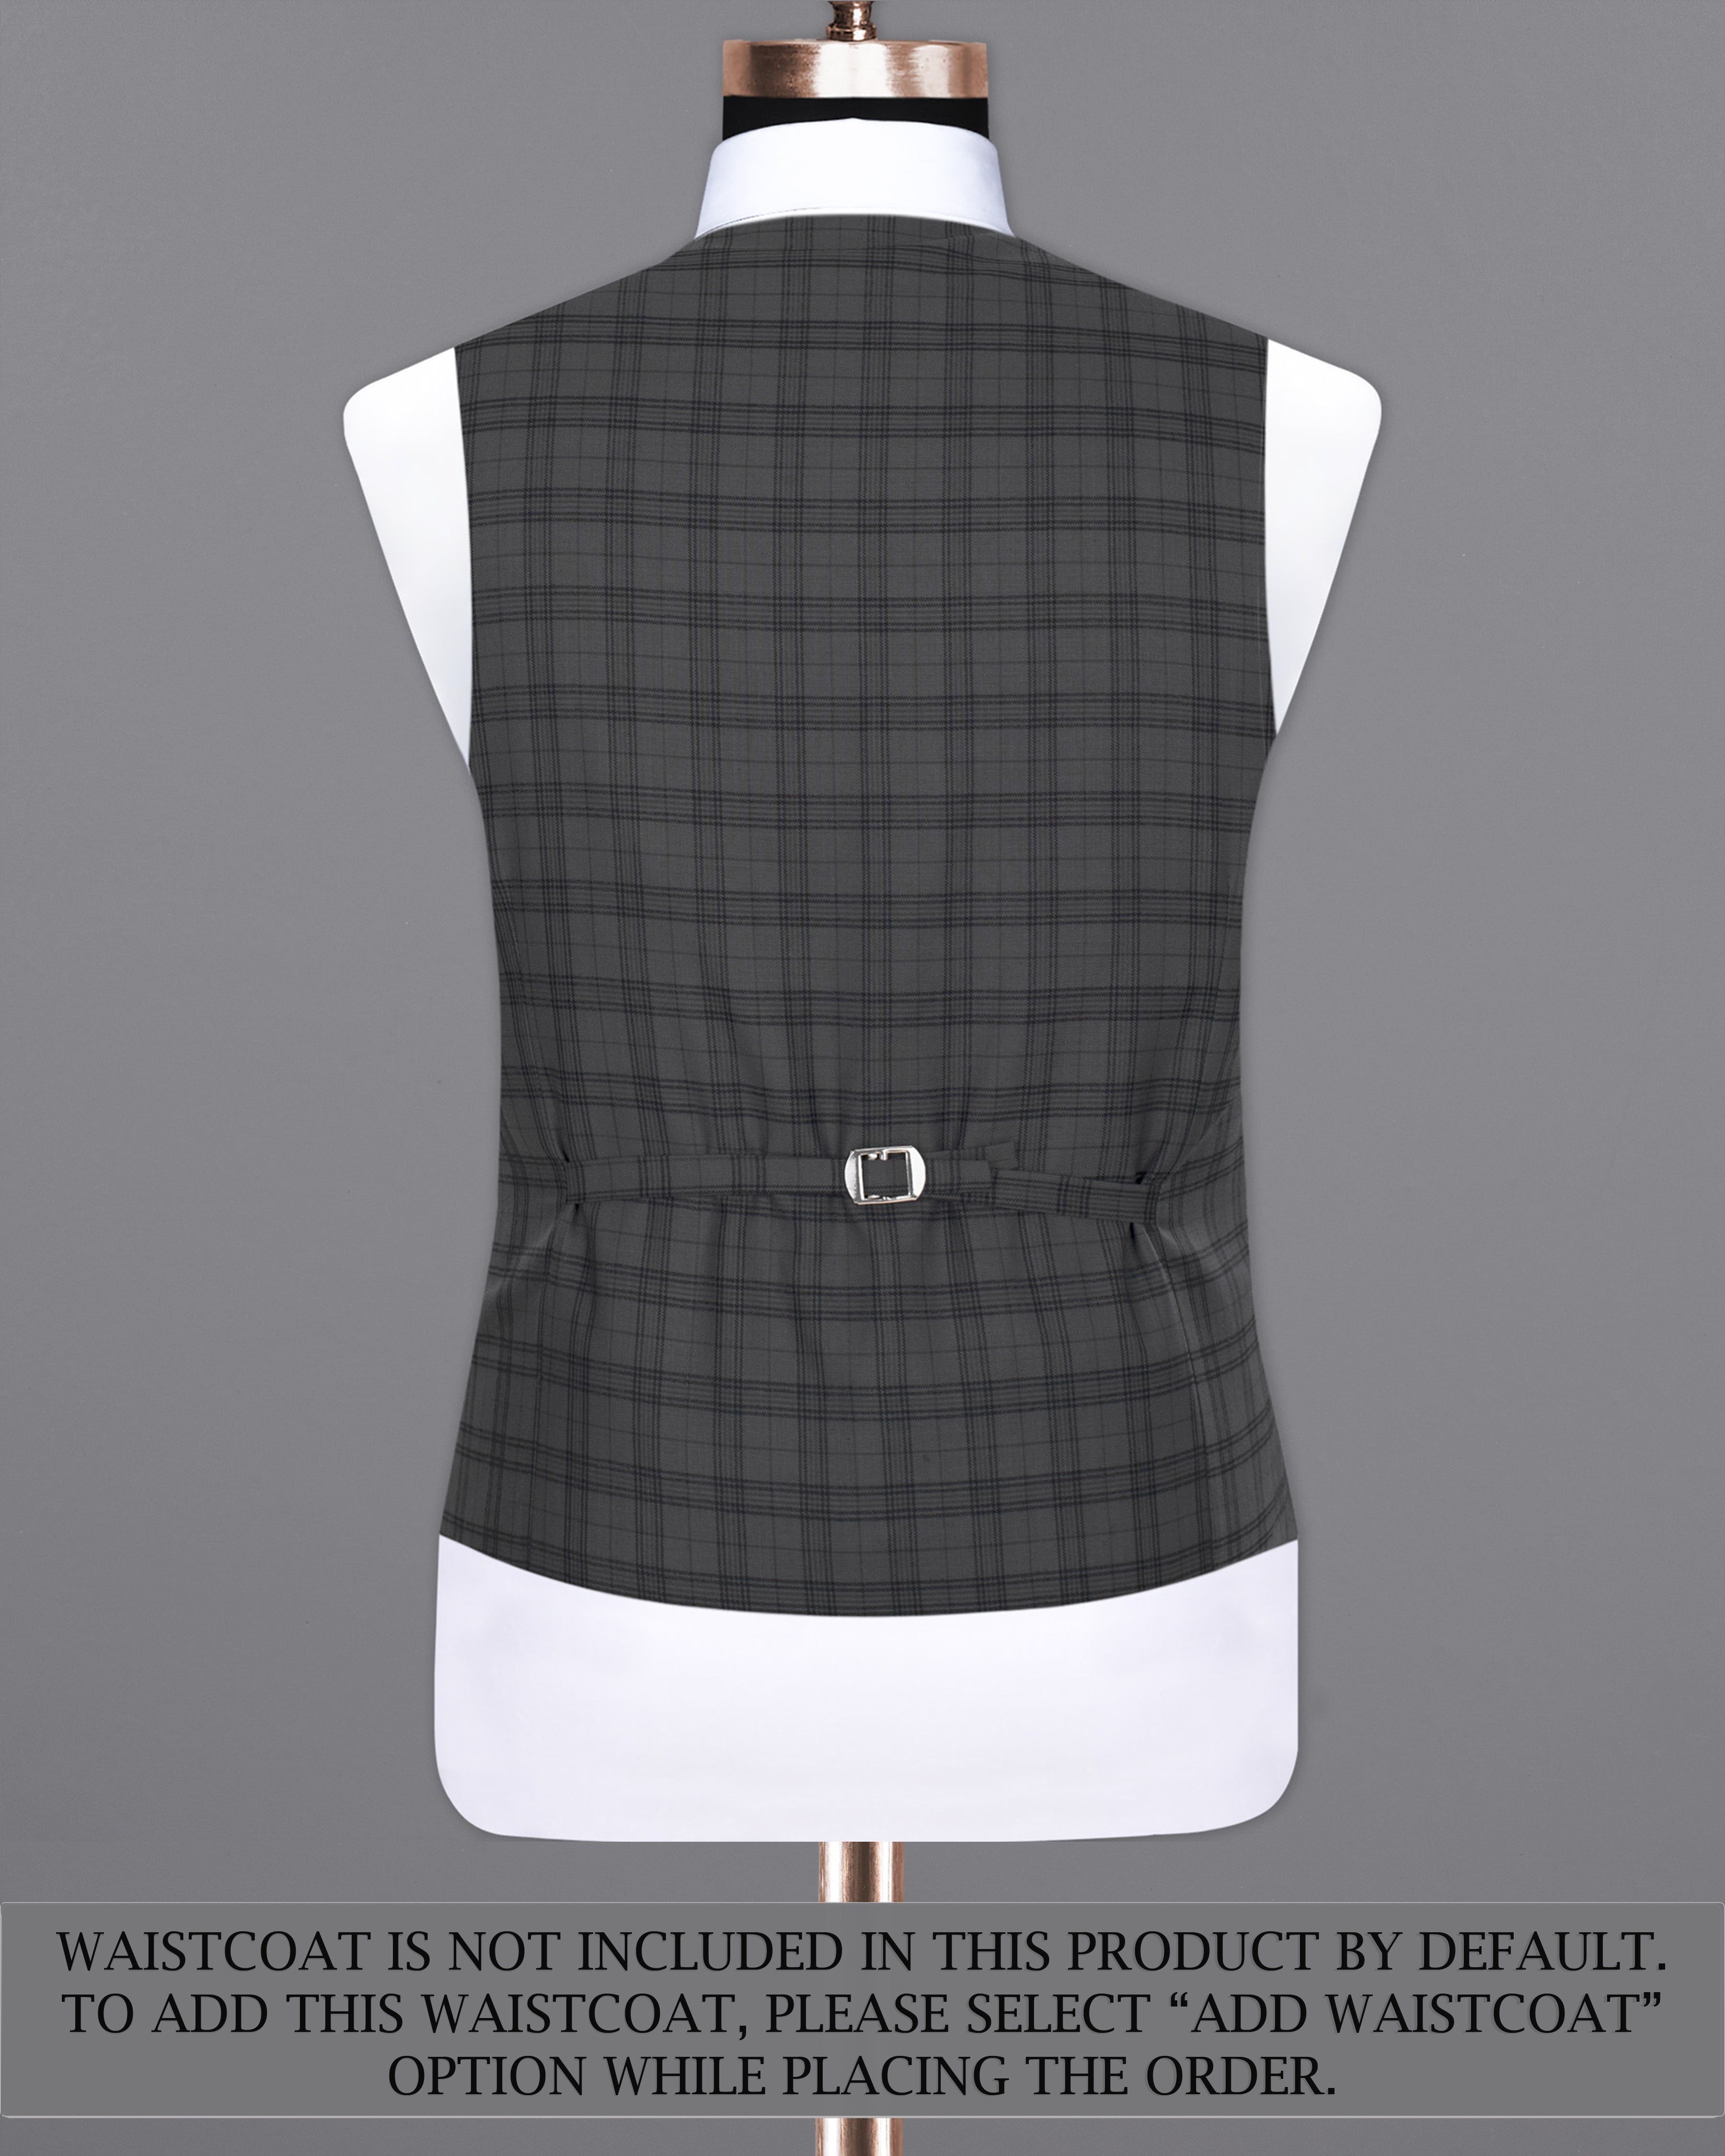 Masala Grey Plaid Double Breasted Wool Rich Suit